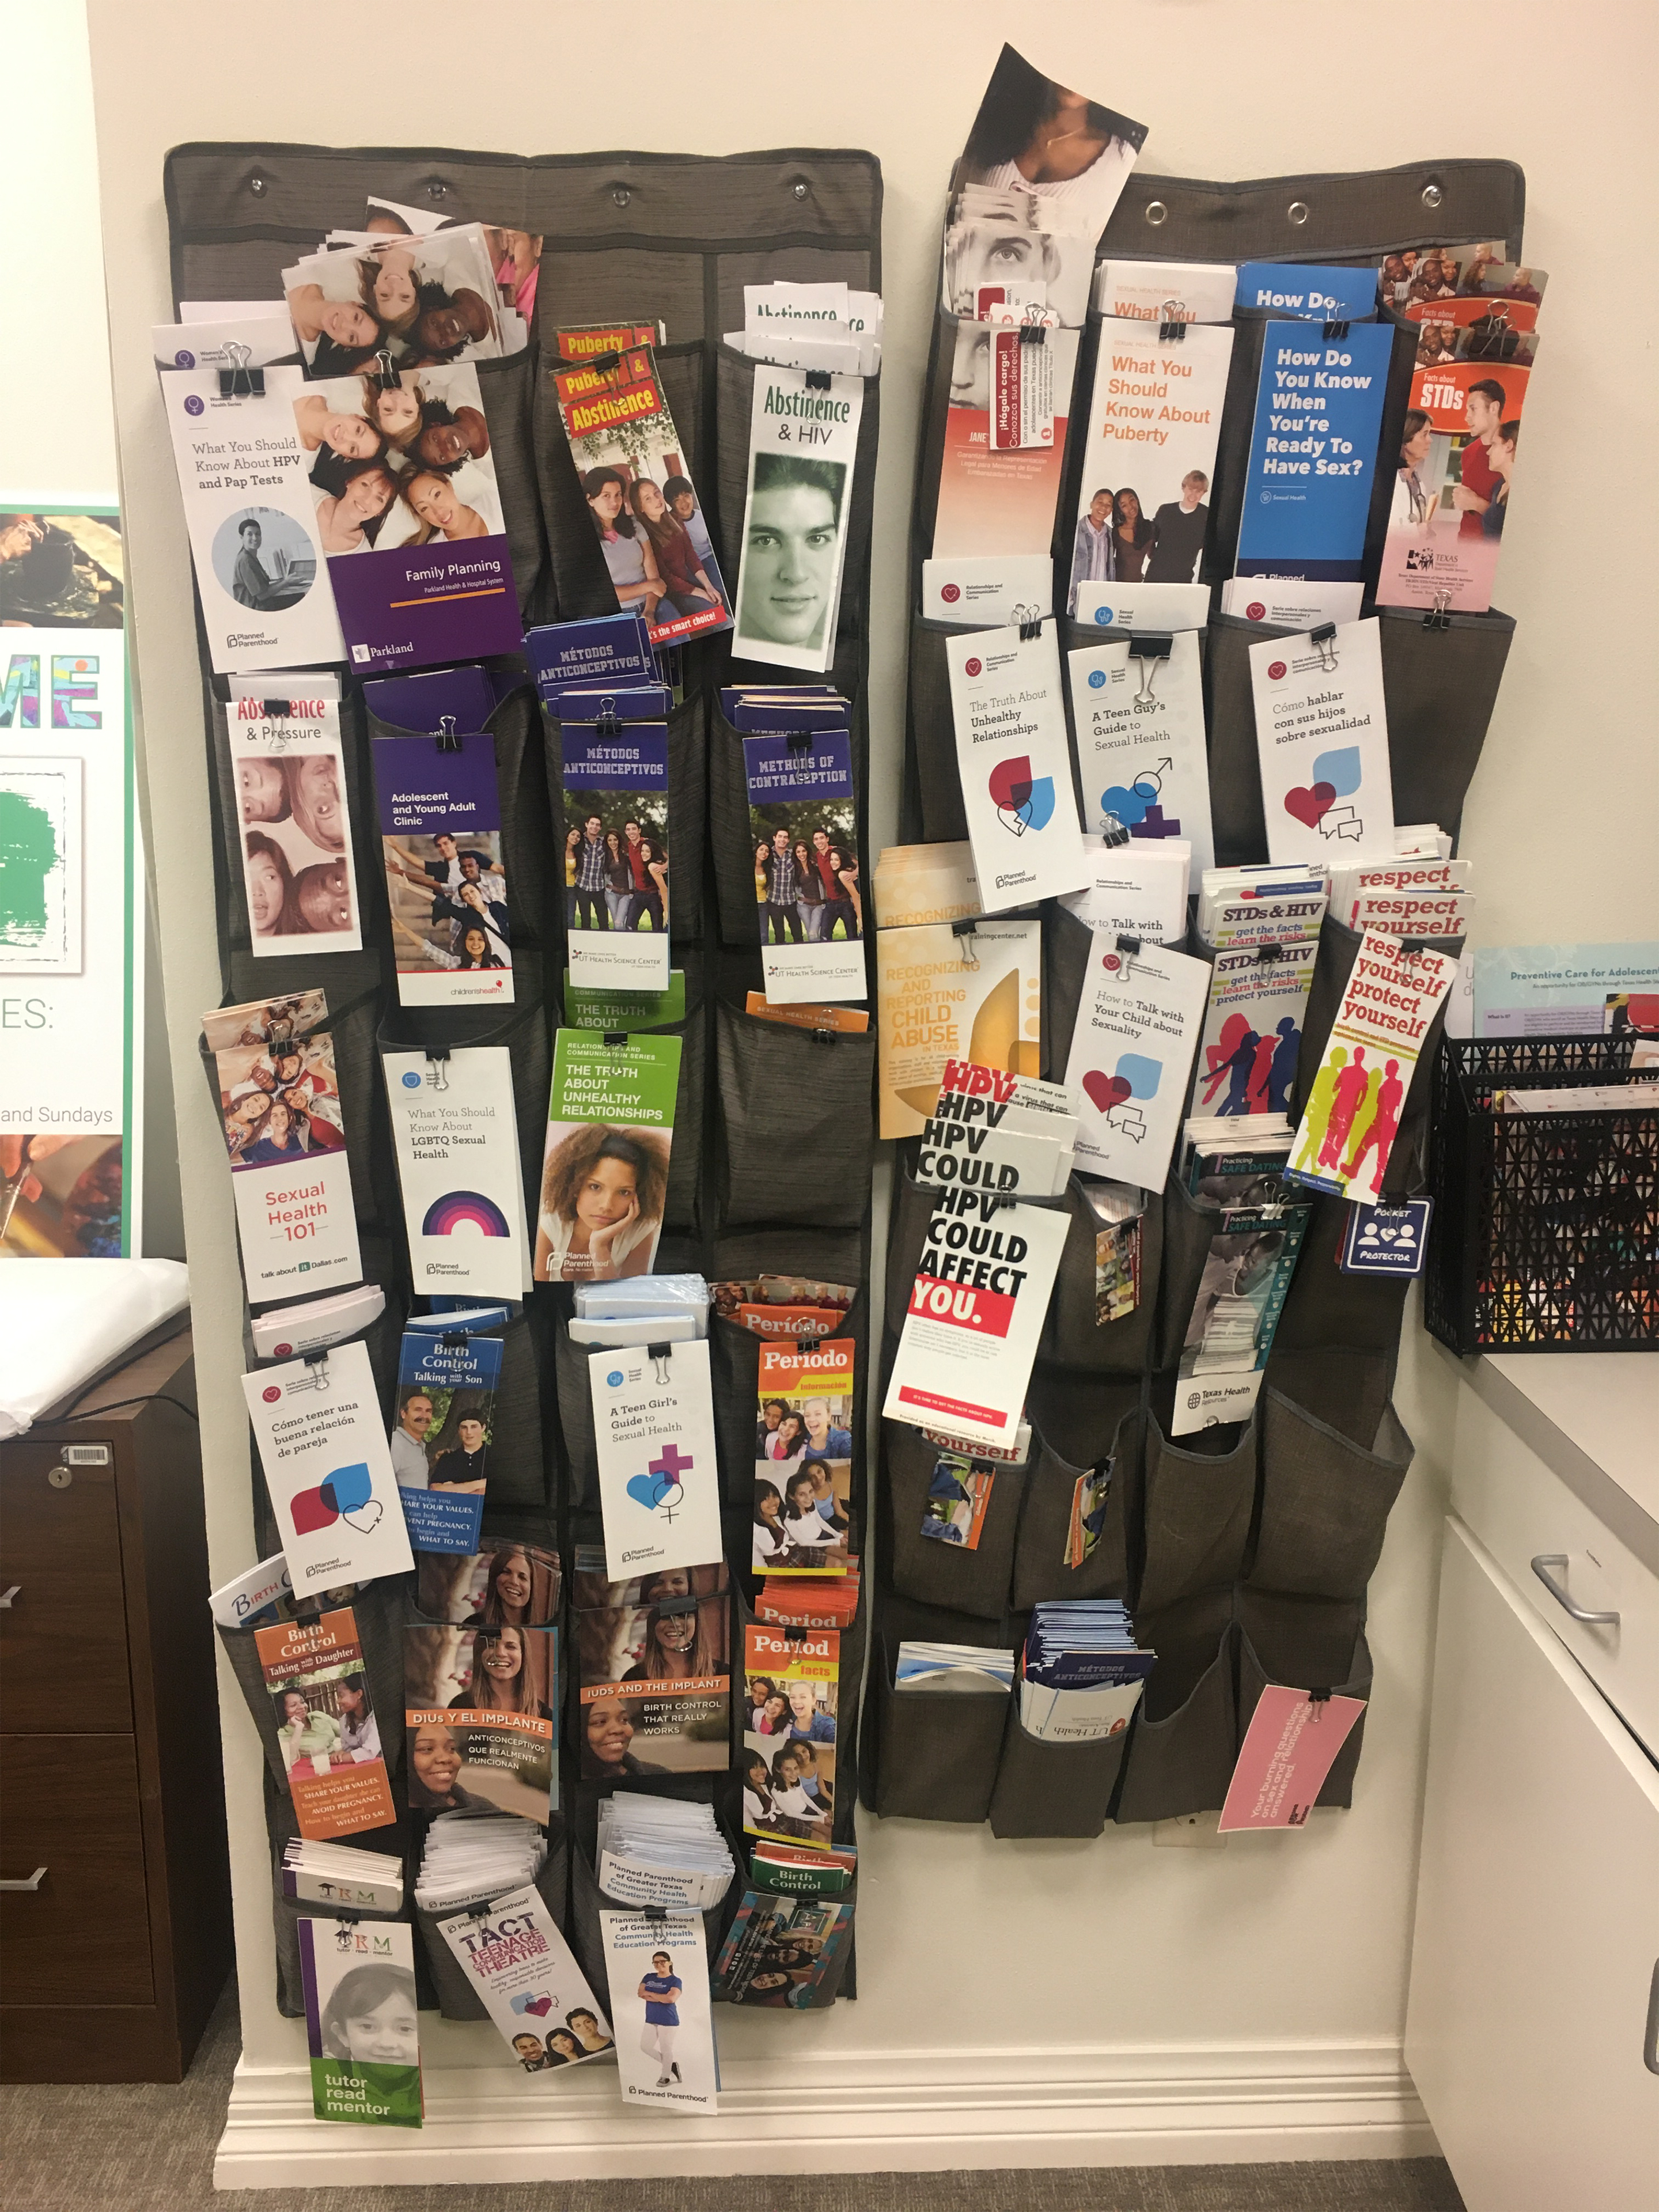 A photo shows a wall filled with pamphlets.